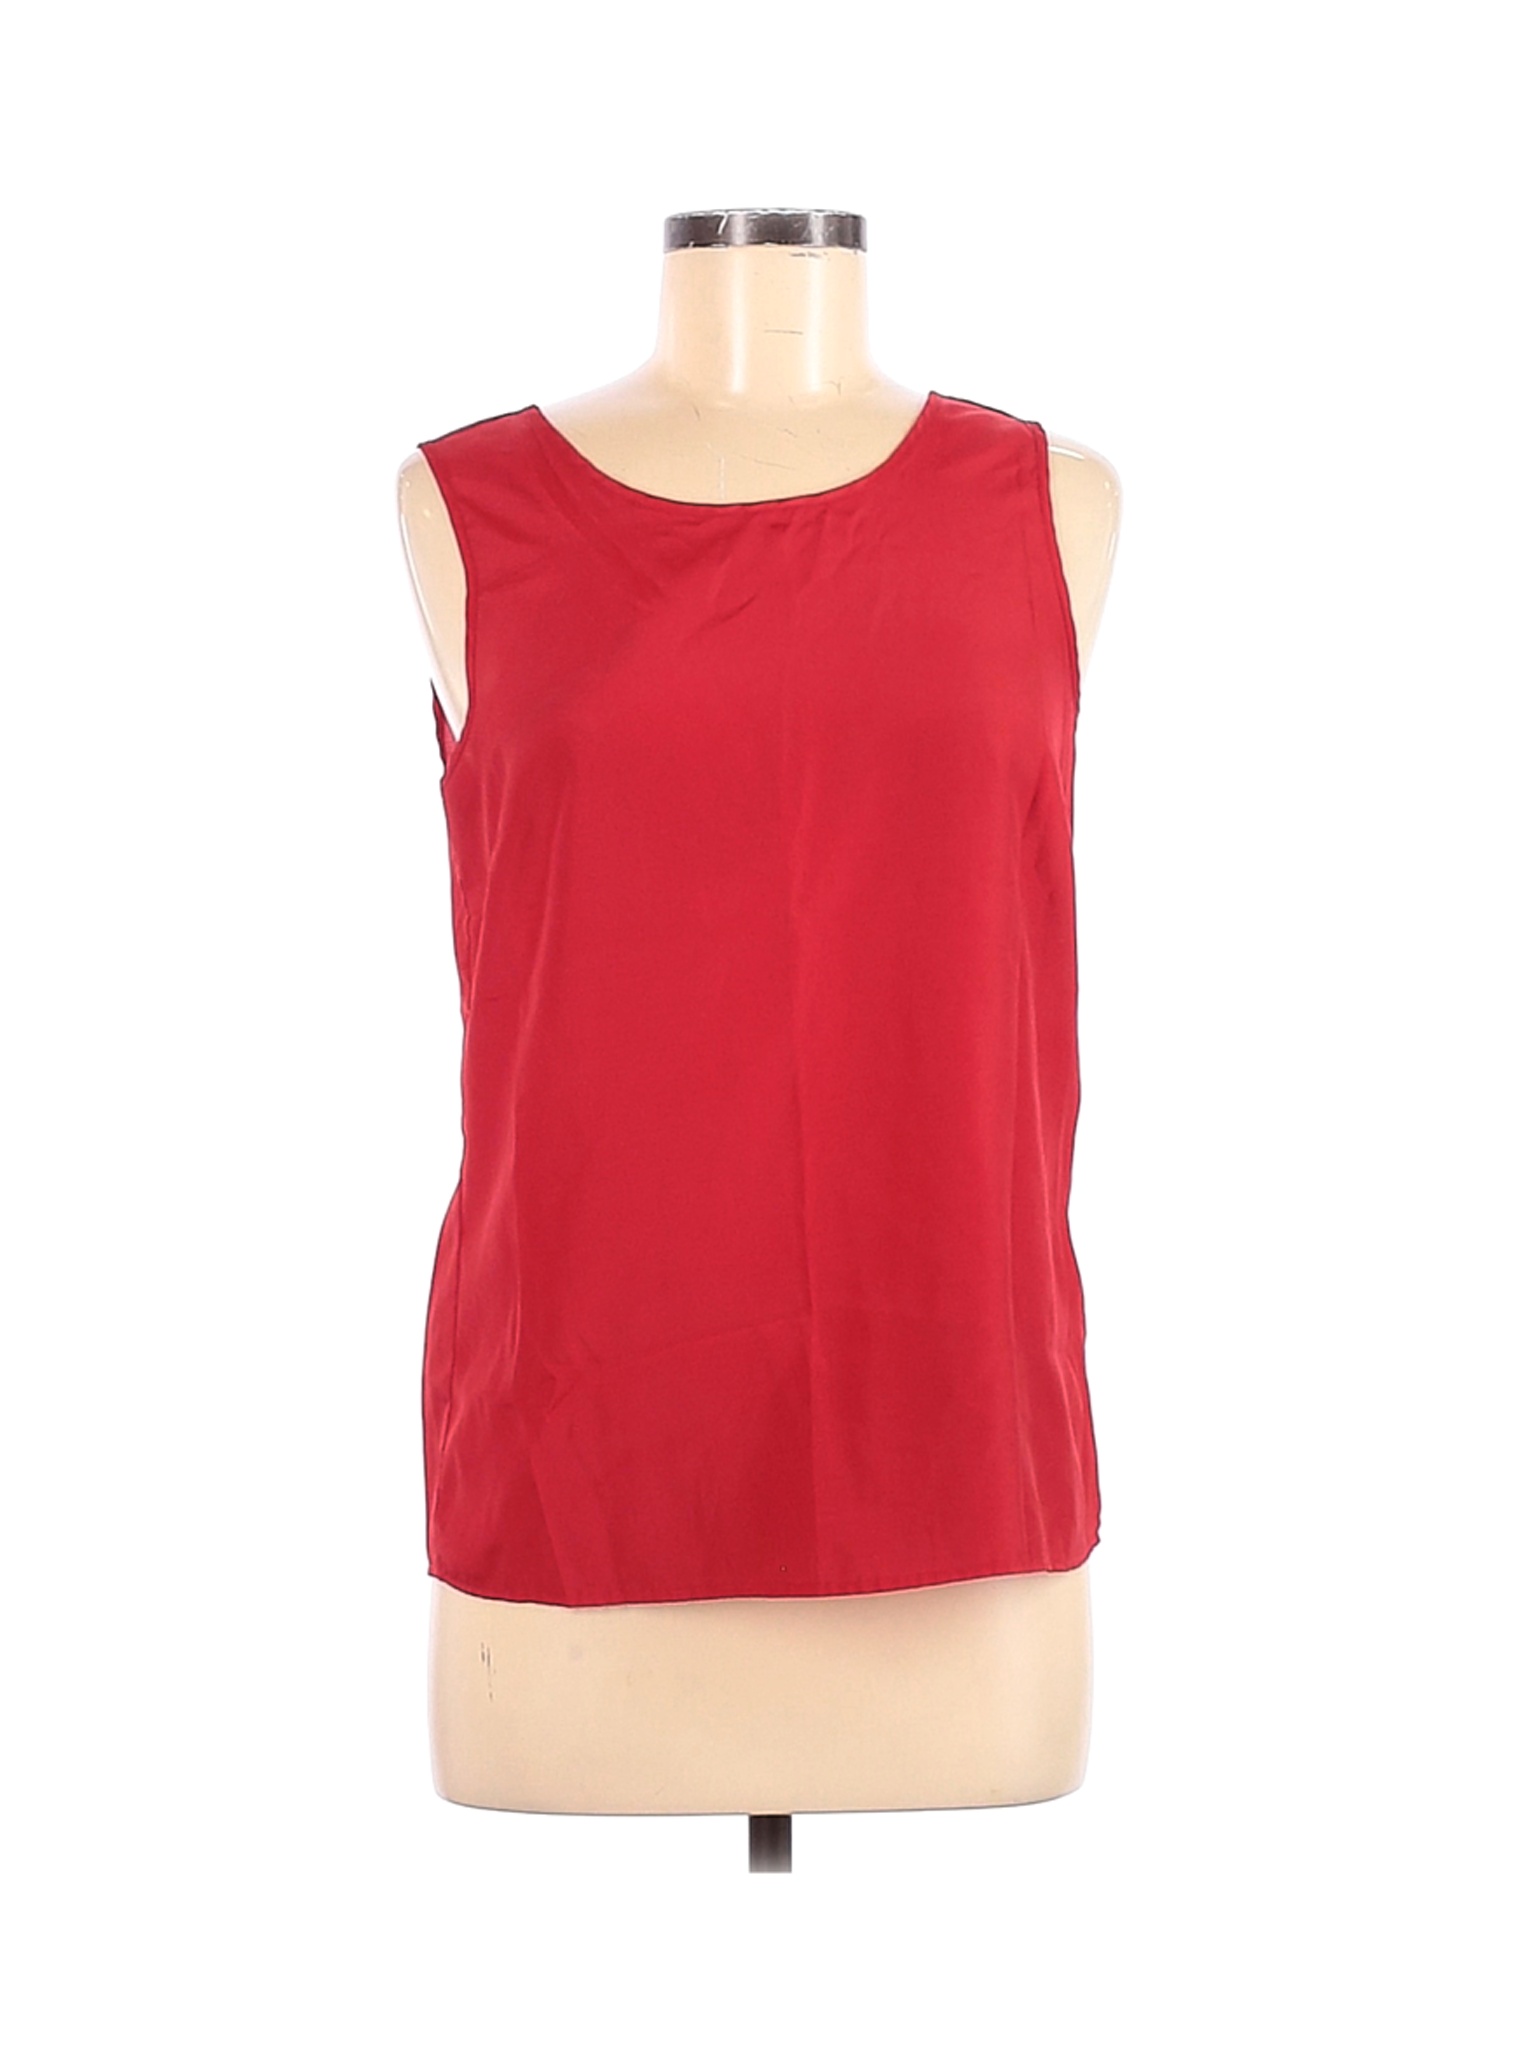 The Limited Women Red Sleeveless Blouse S | eBay